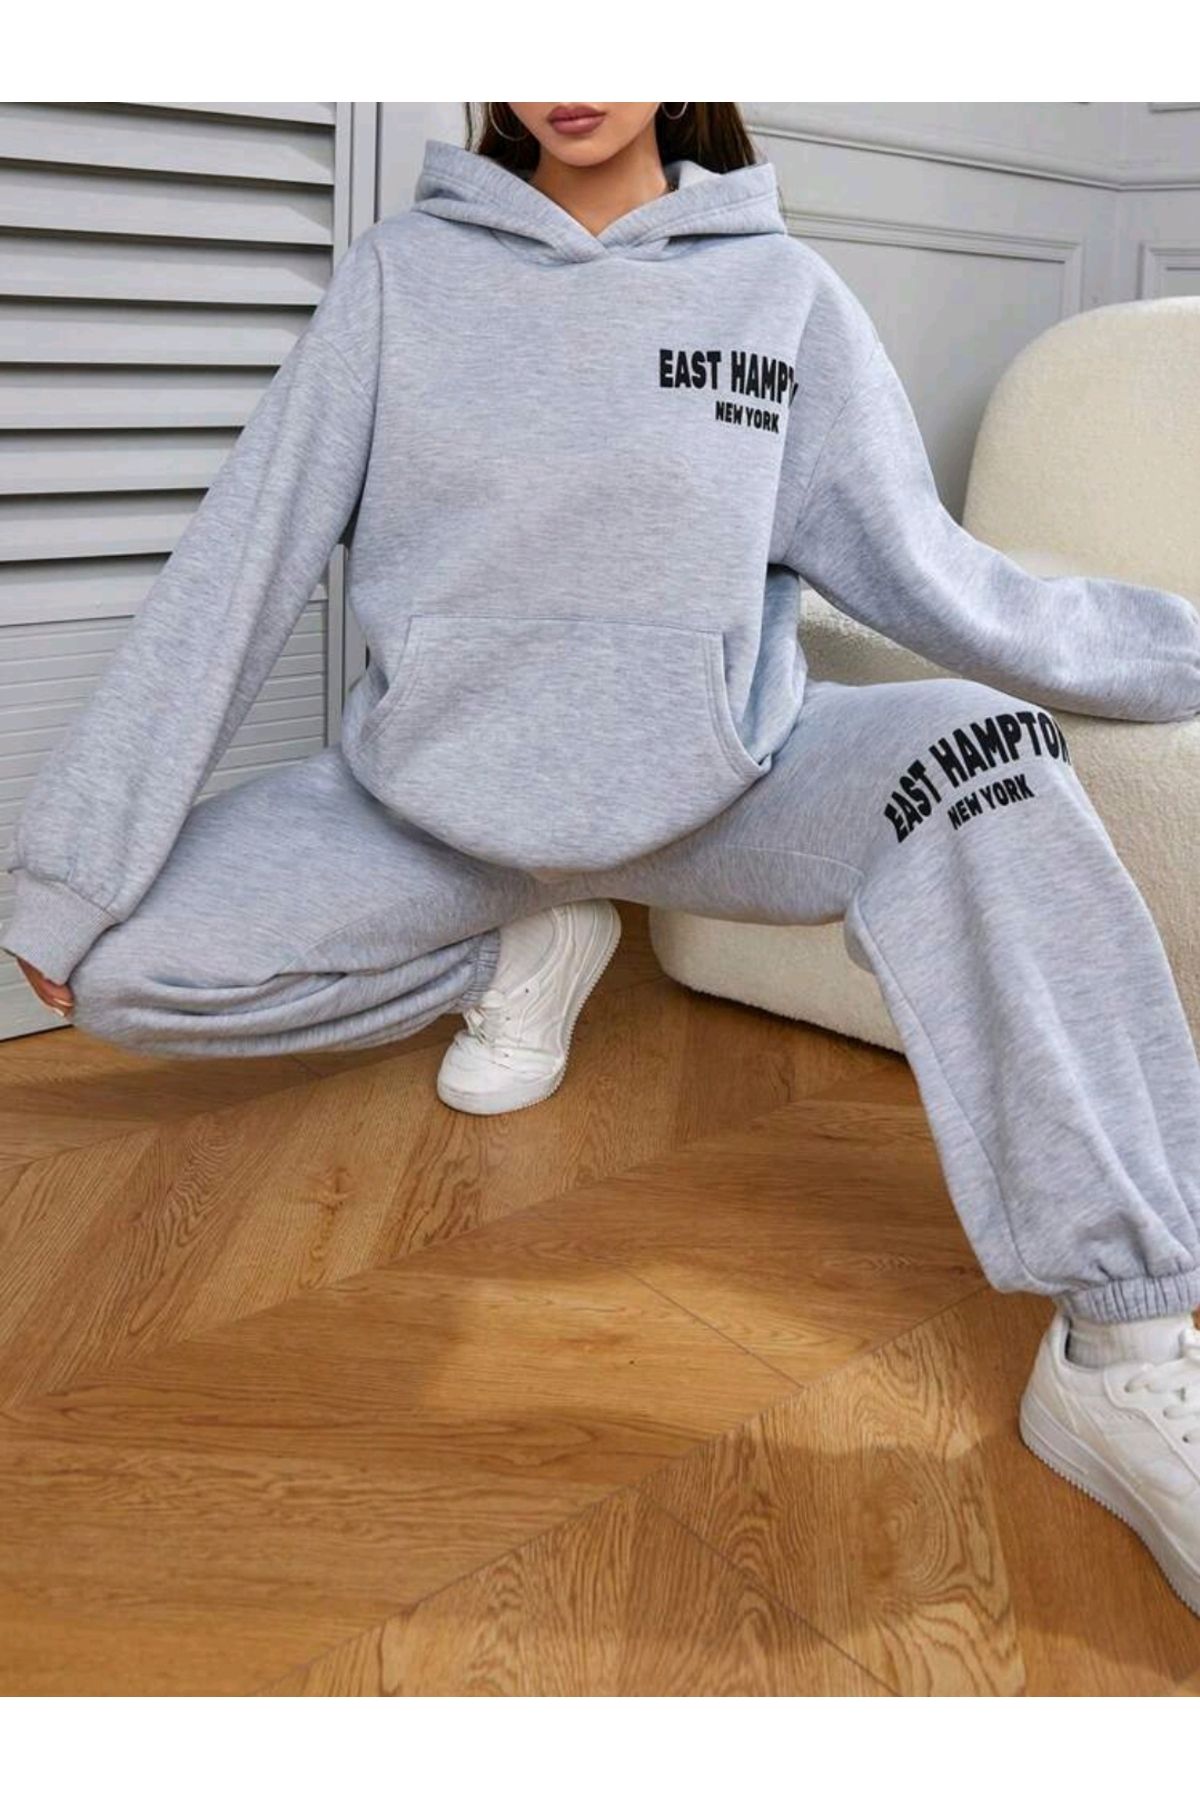 Womens Tracksuits Sweatsuit Top And Long Pants Woman Set Female Cotton  Casual Sports Women Sweat Suits Outfits Plus Size From 44,19 €